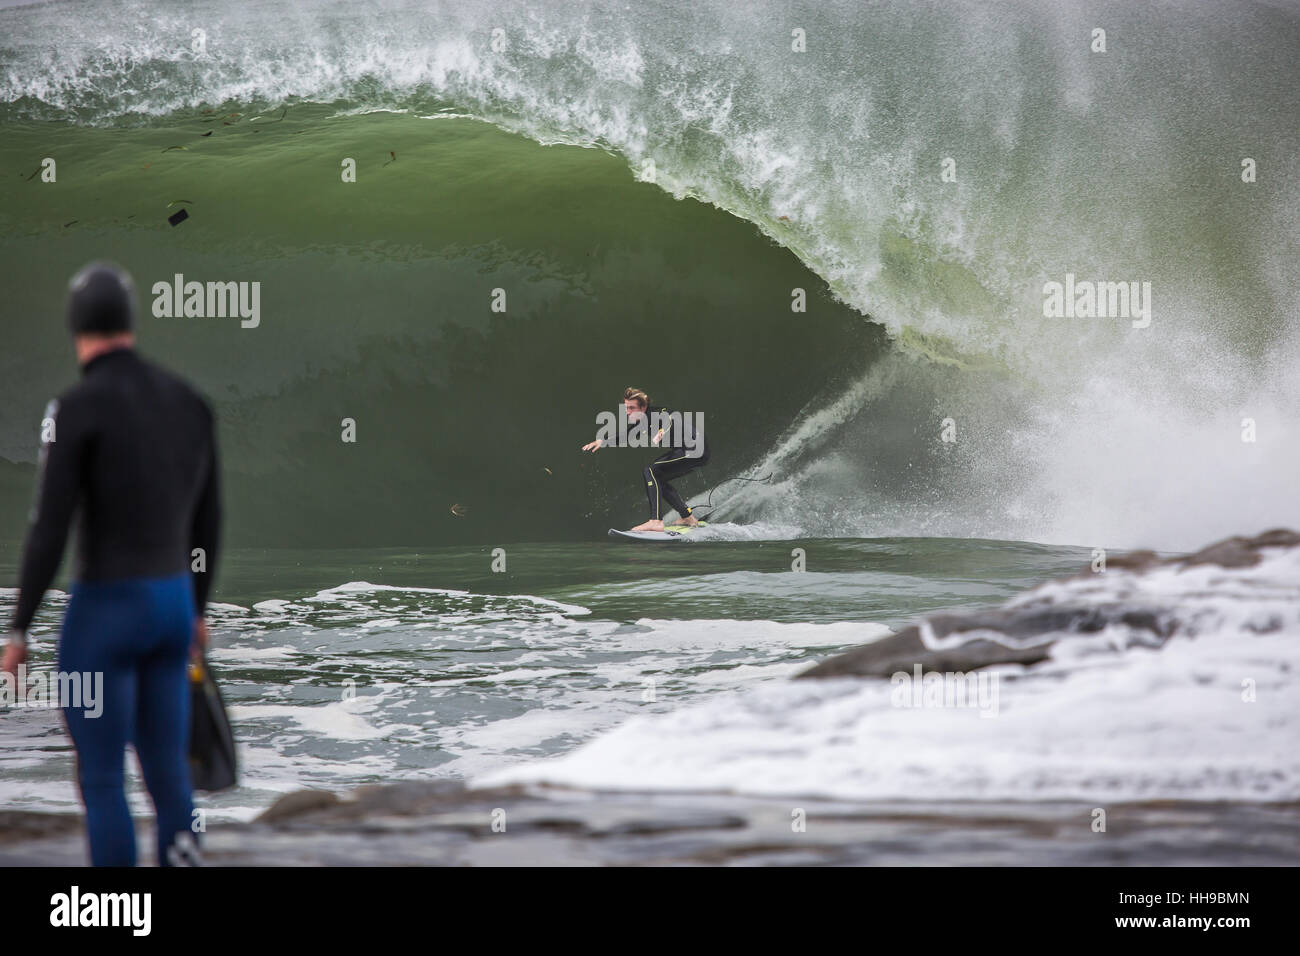 Pro surfer Riley Laing surfing in the Red Bull Cape Fear big wave surfing contest in Sydney, Australia Stock Photo